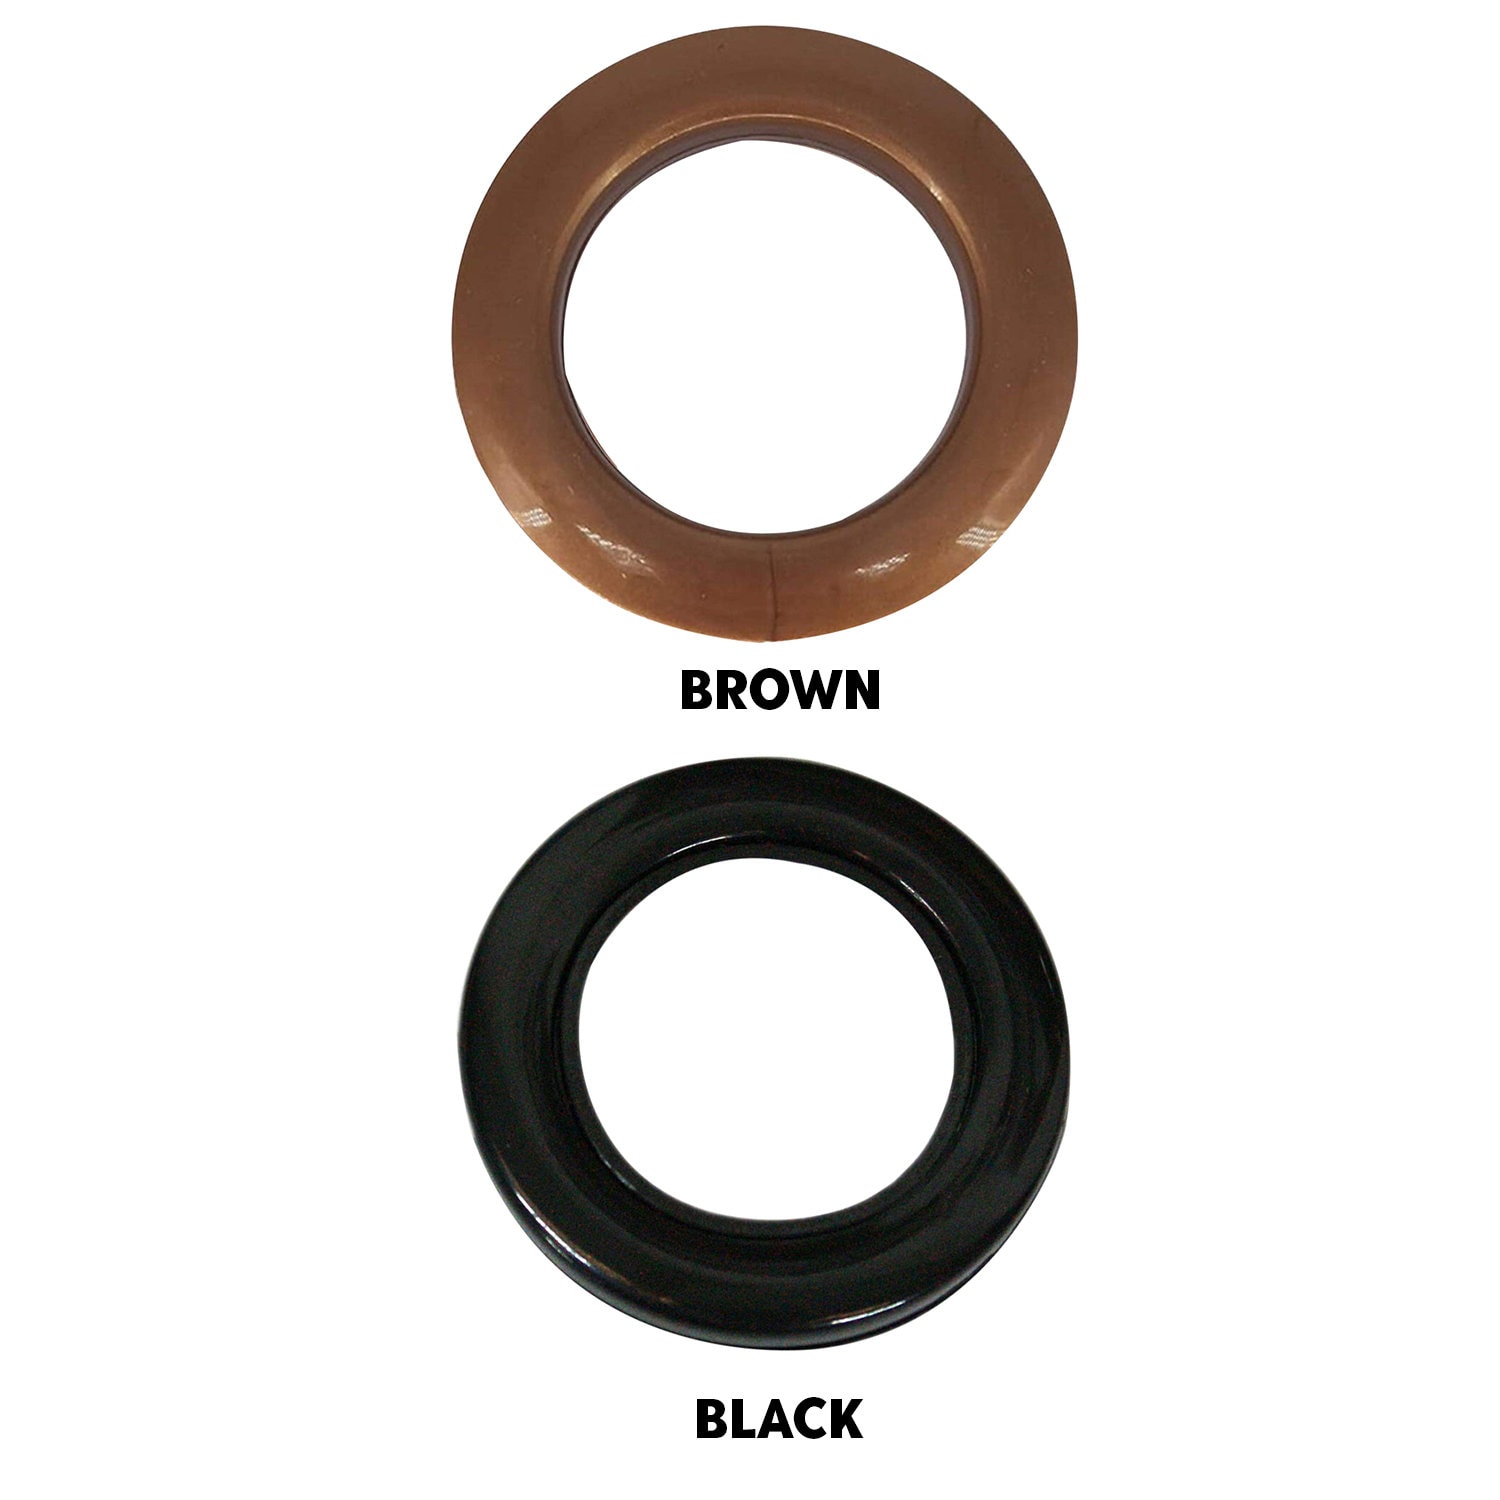 Curtain Eyelet Rings Curtain Grommets Round Plastic 40mm for